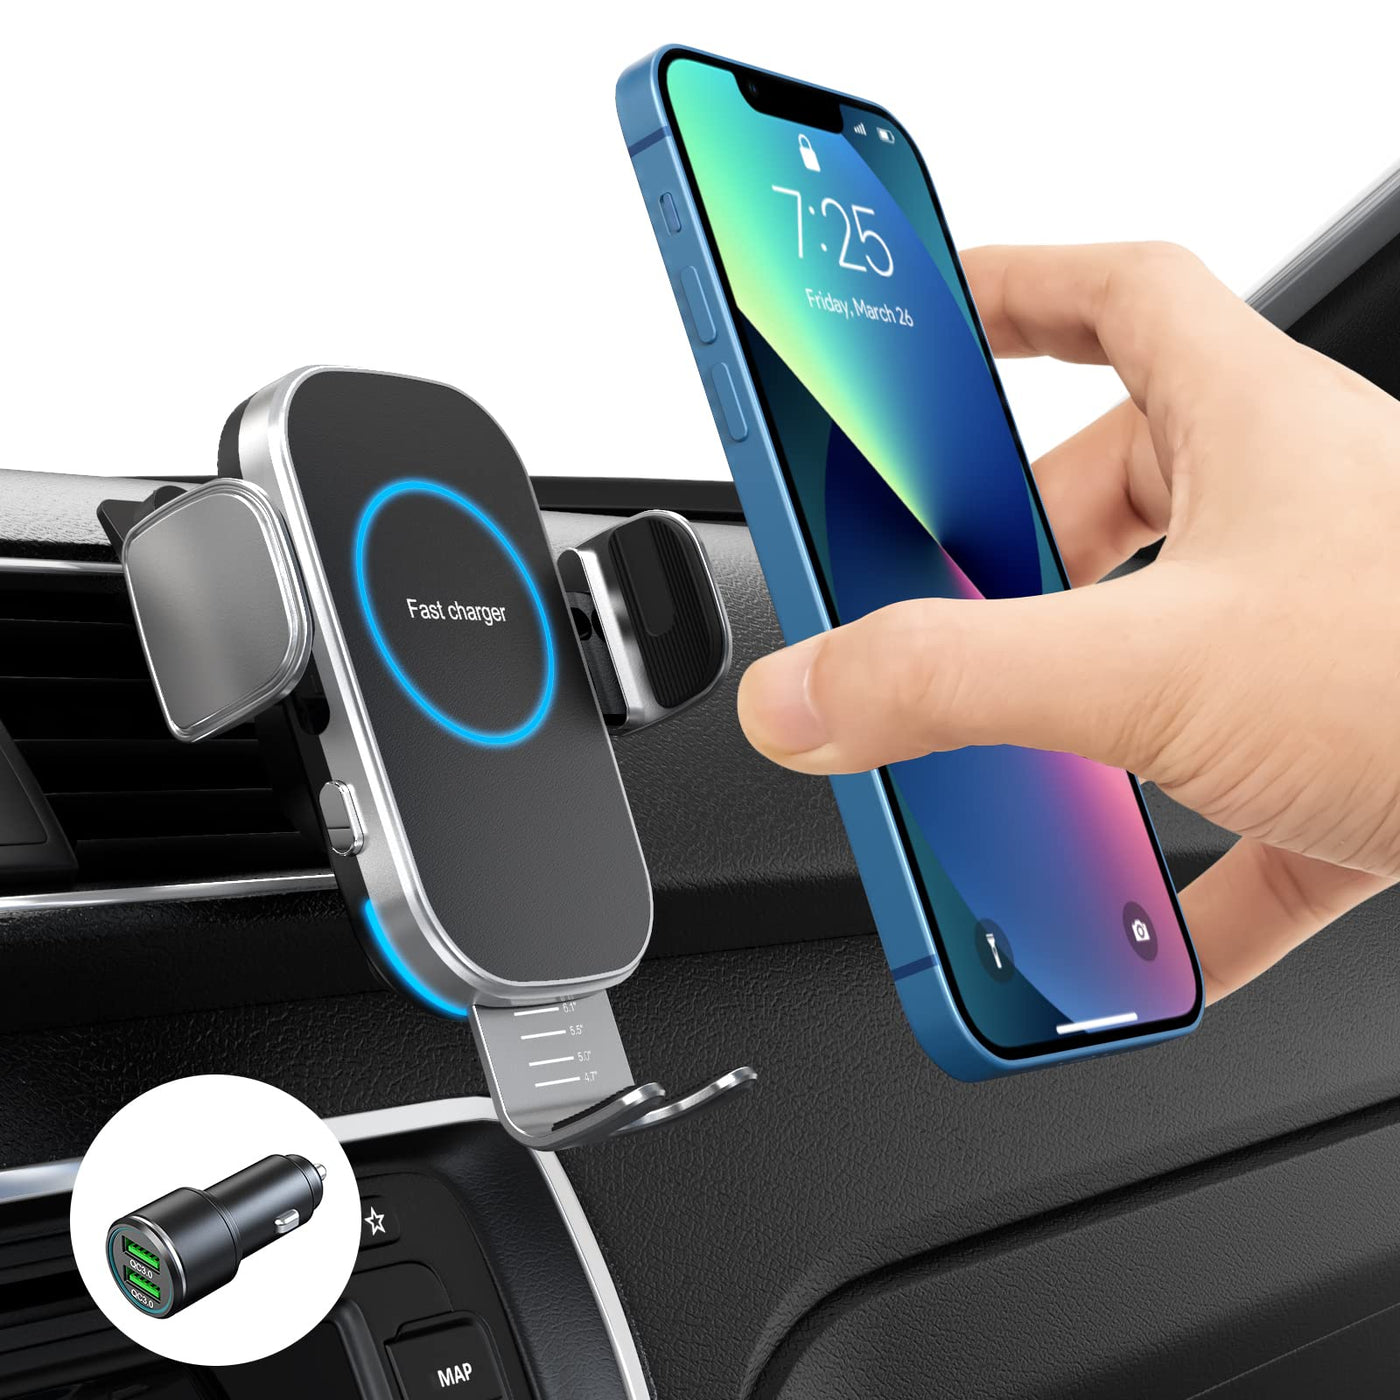 Forcell Chargeur Voiture USB 18W Quick Charge 3.0 Charge Rapide